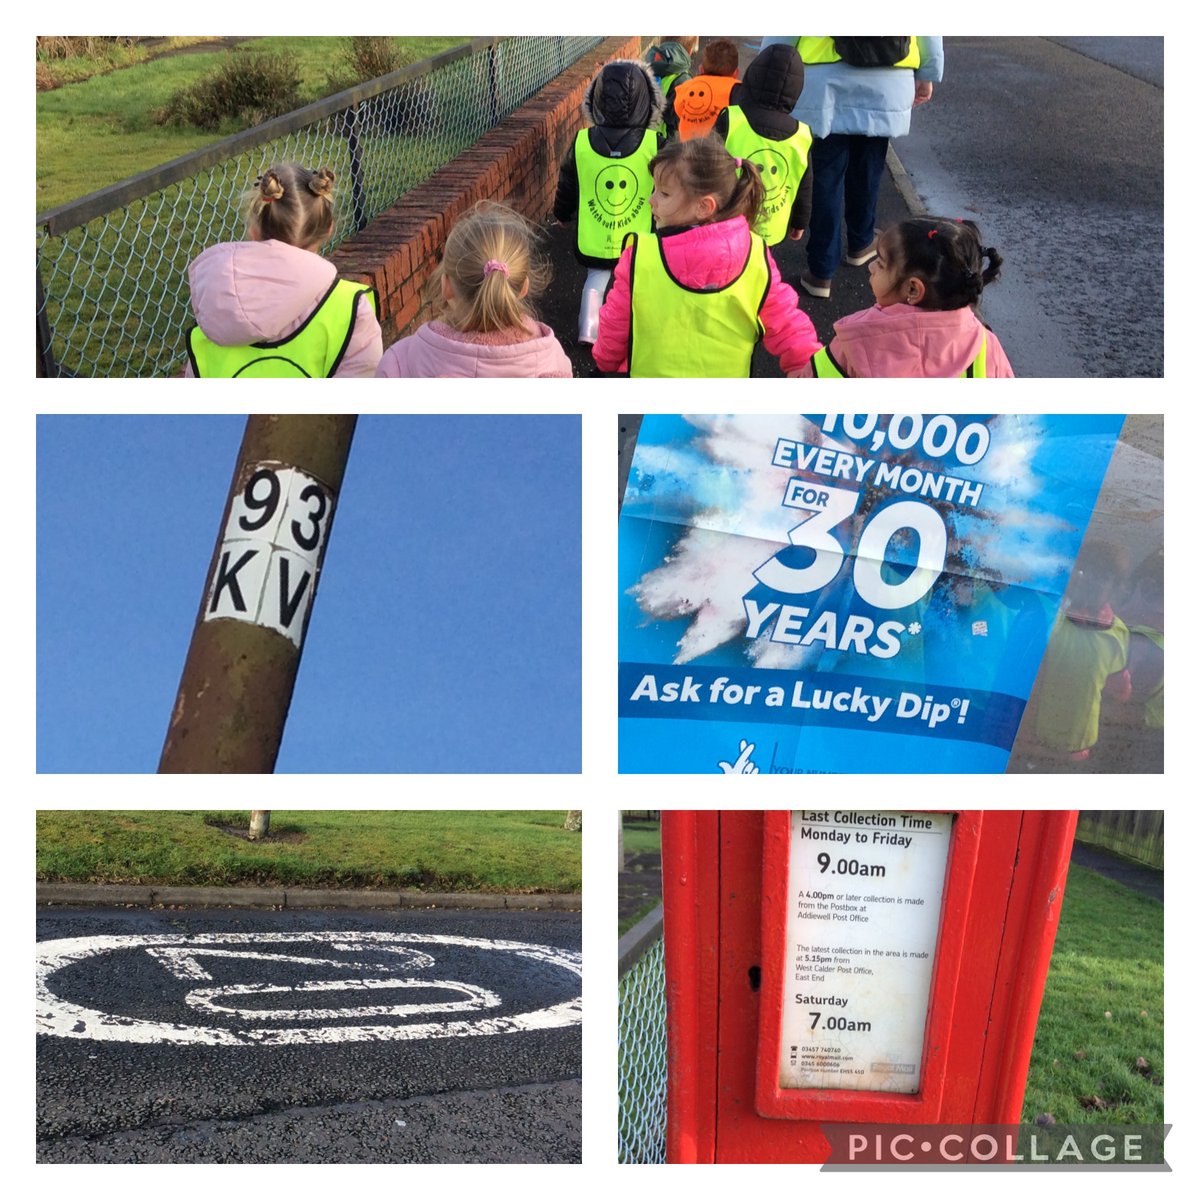 What a fantastic number walk today 🚶‍♀️🚶 Who knew there were numbers in so many places? #achievingalice #safesally #ourcommunity